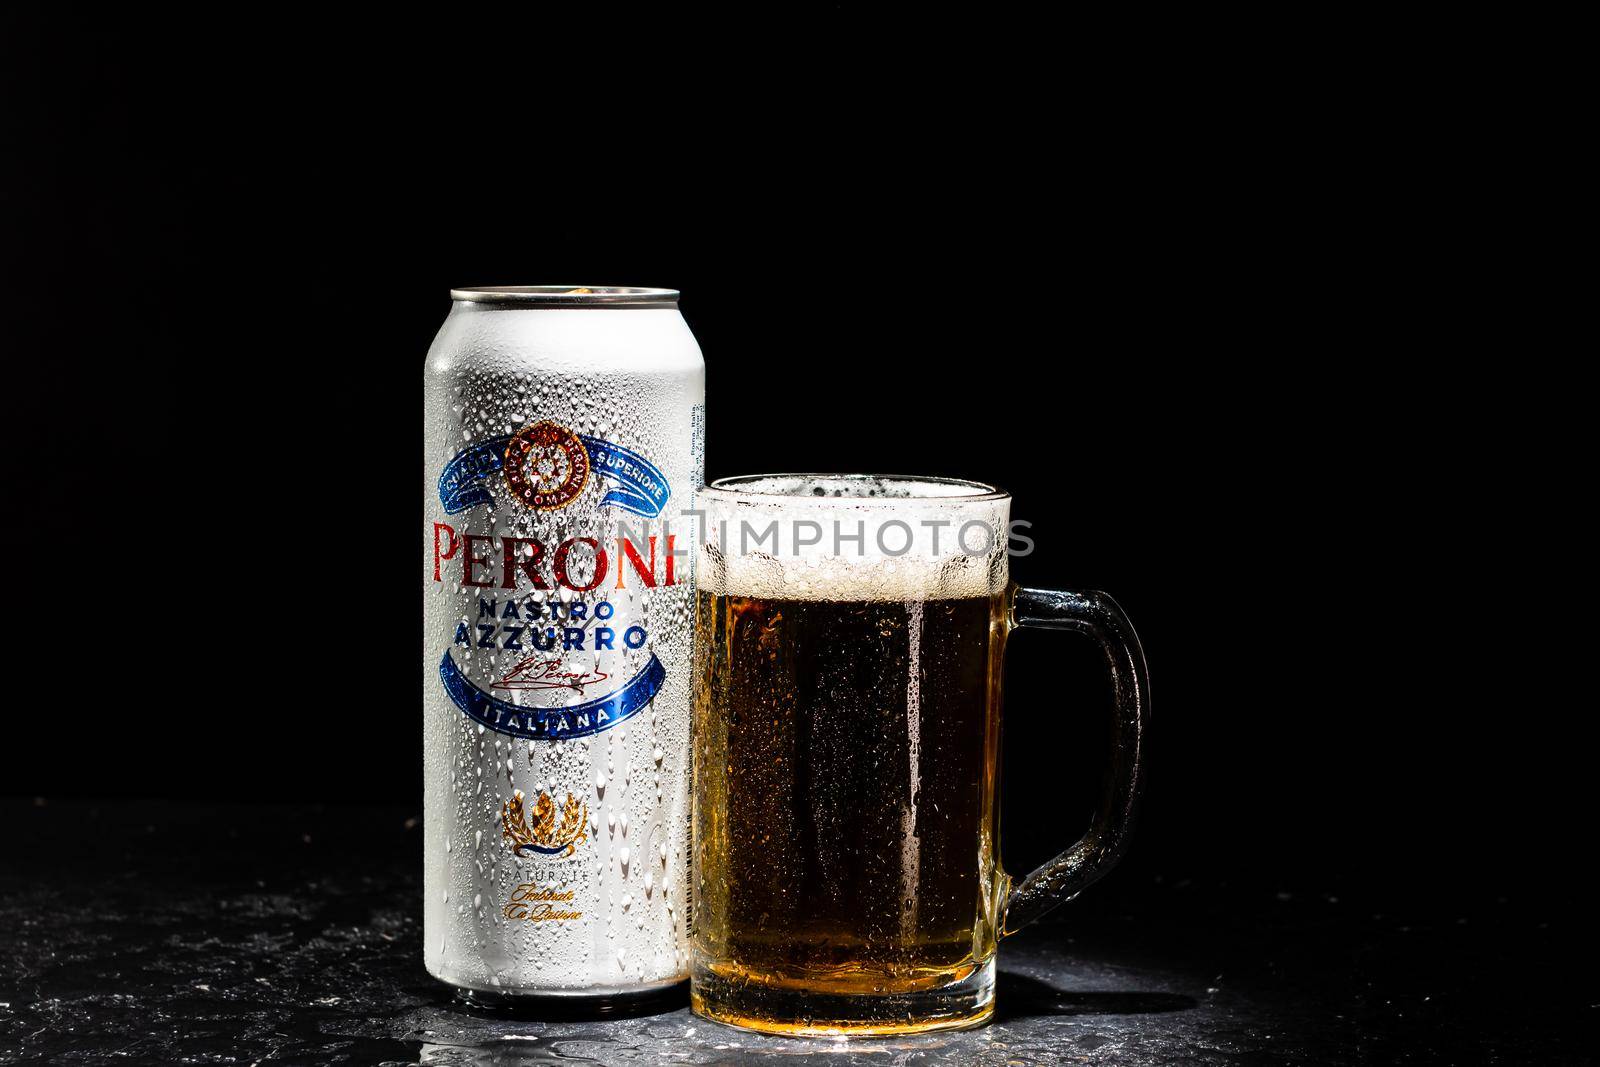 Can of Peroni Nastro Azzurro beer and beer glass on dark background. Illustrative editorial photo shot in Bucharest, Romania, 2021